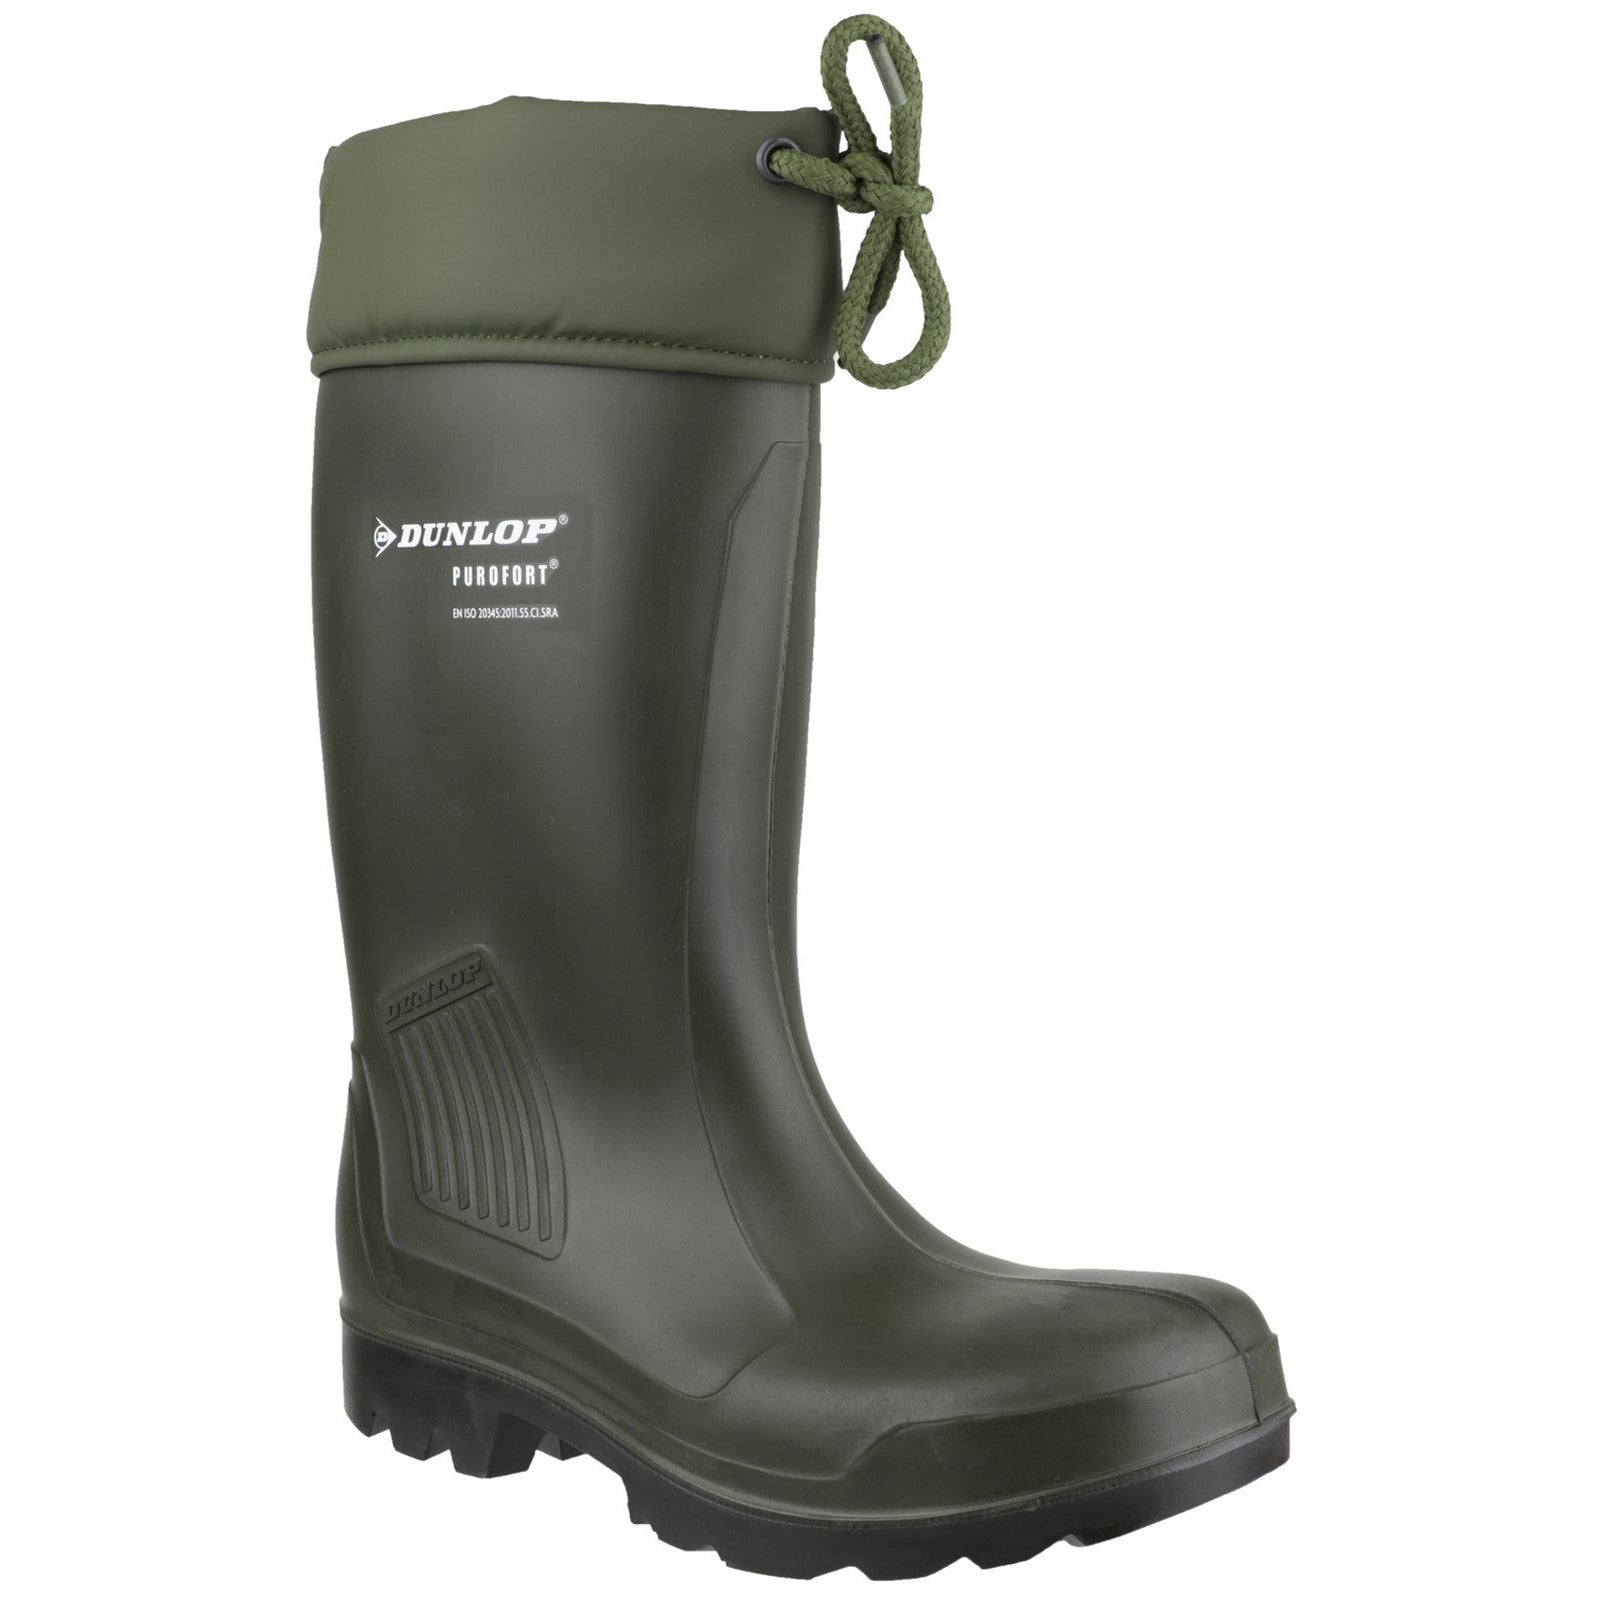 Dunlop Thermoflex Full Safety Boots